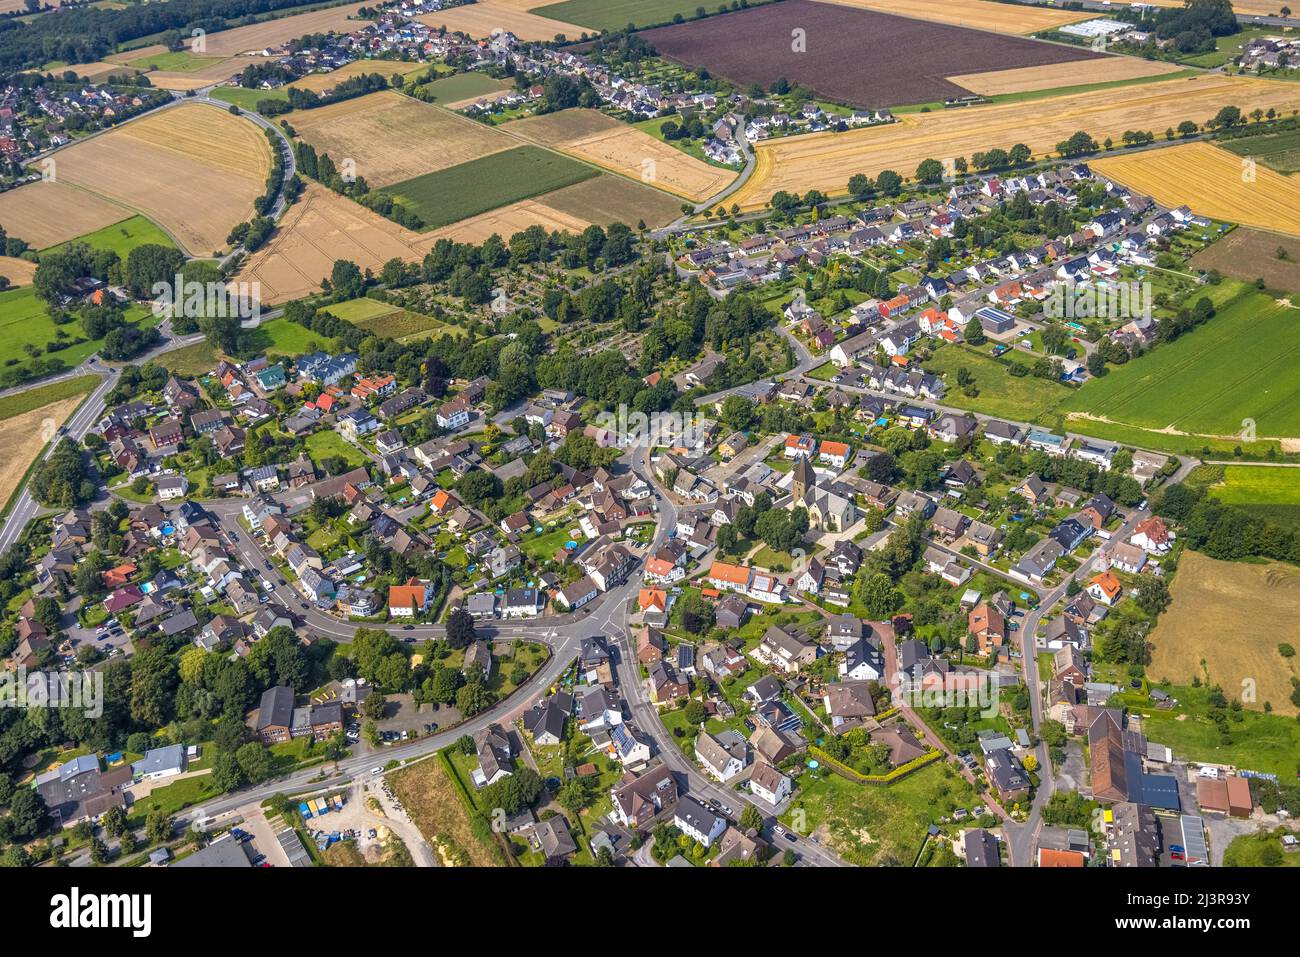 Aerial view, local view and Lutheran church in the district of Methler, Kamen, Ruhr area, North Rhine-Westphalia, Germany, place of worship, DE, Europ Stock Photo